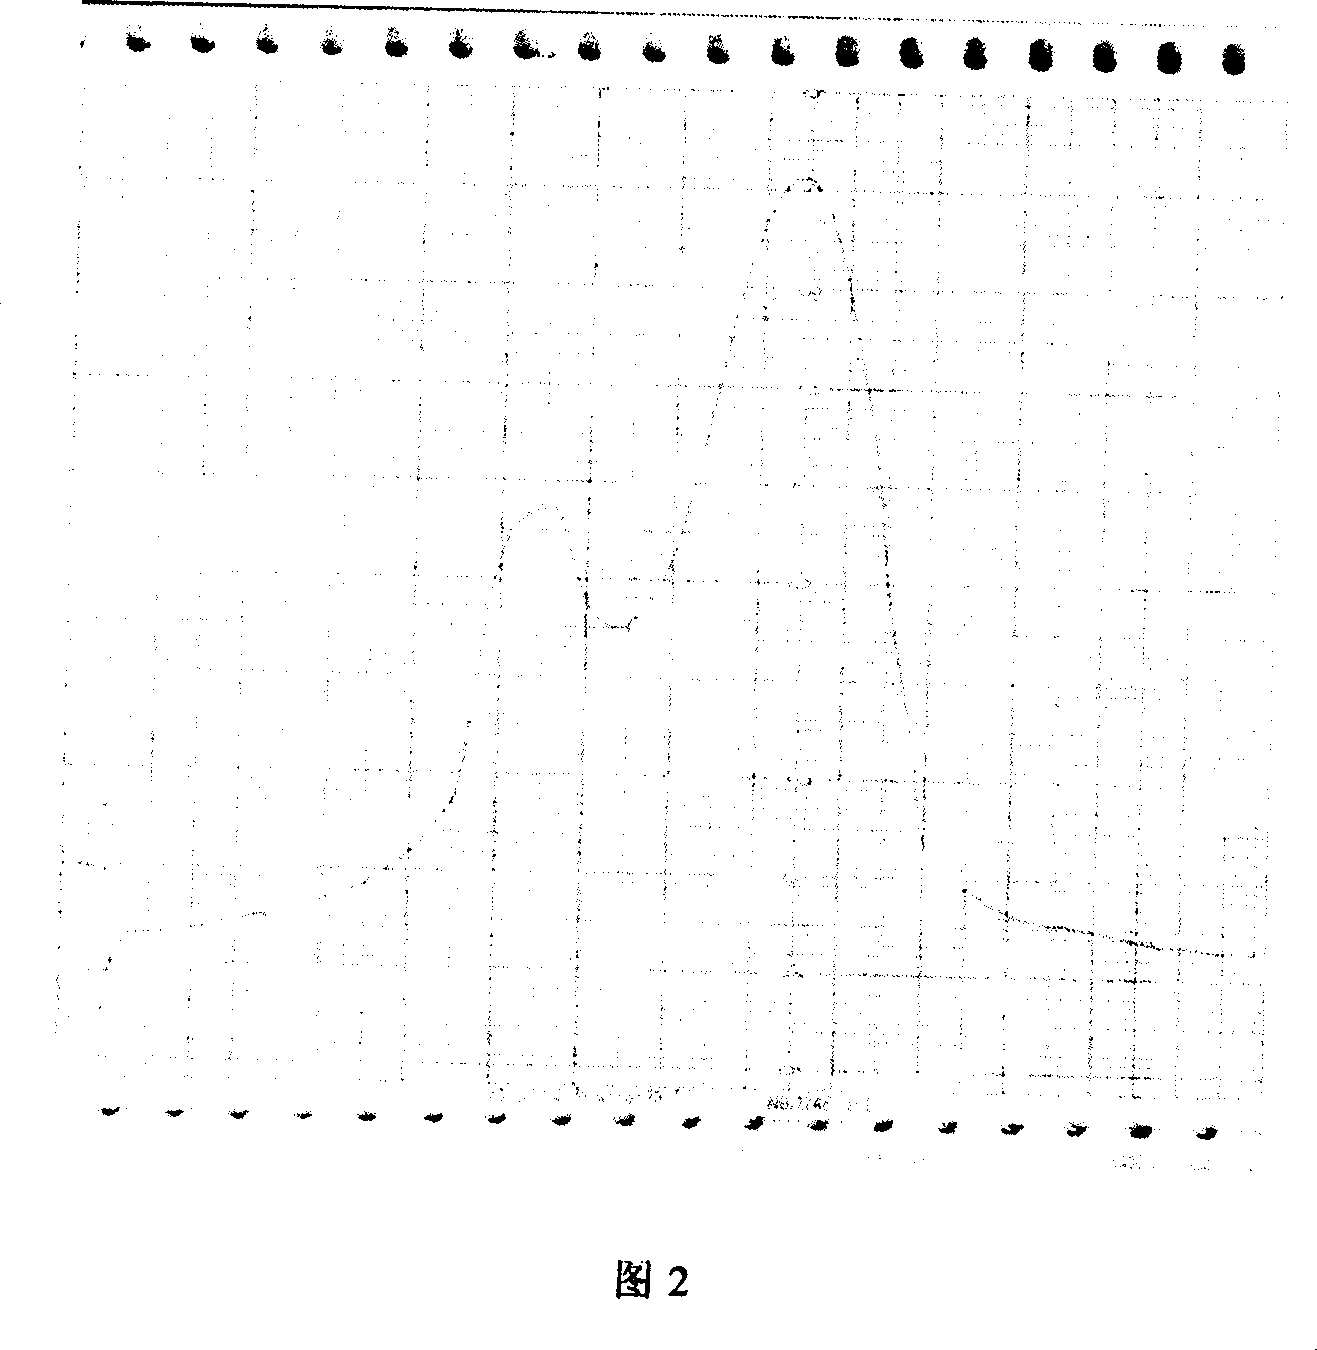 Method for producing recombinant human granulocyte colony stimulating factor